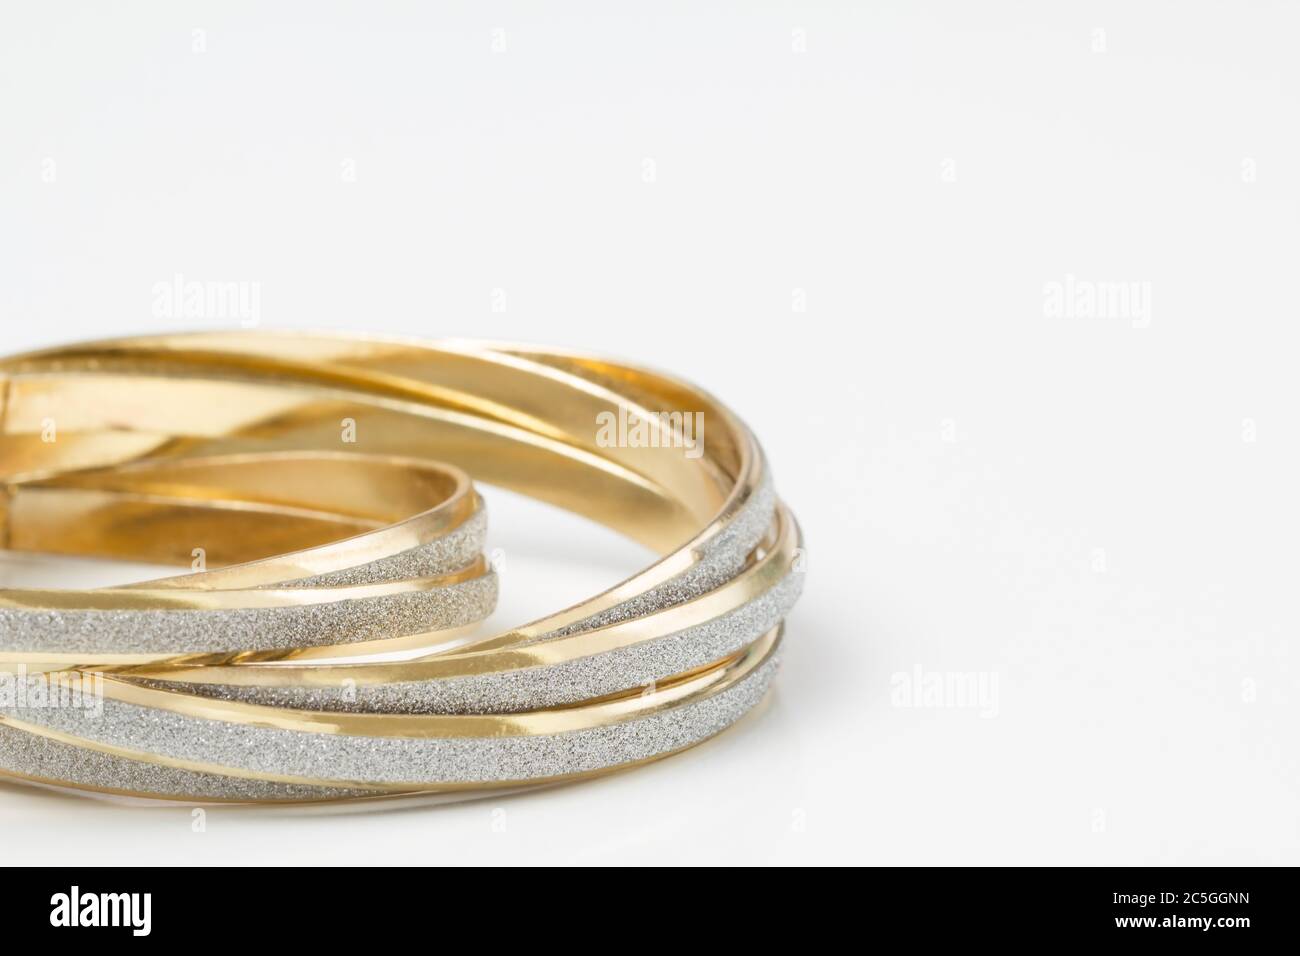 Close up of gold bangles with silver glitter strip, on white background with copy space. Stock Photo